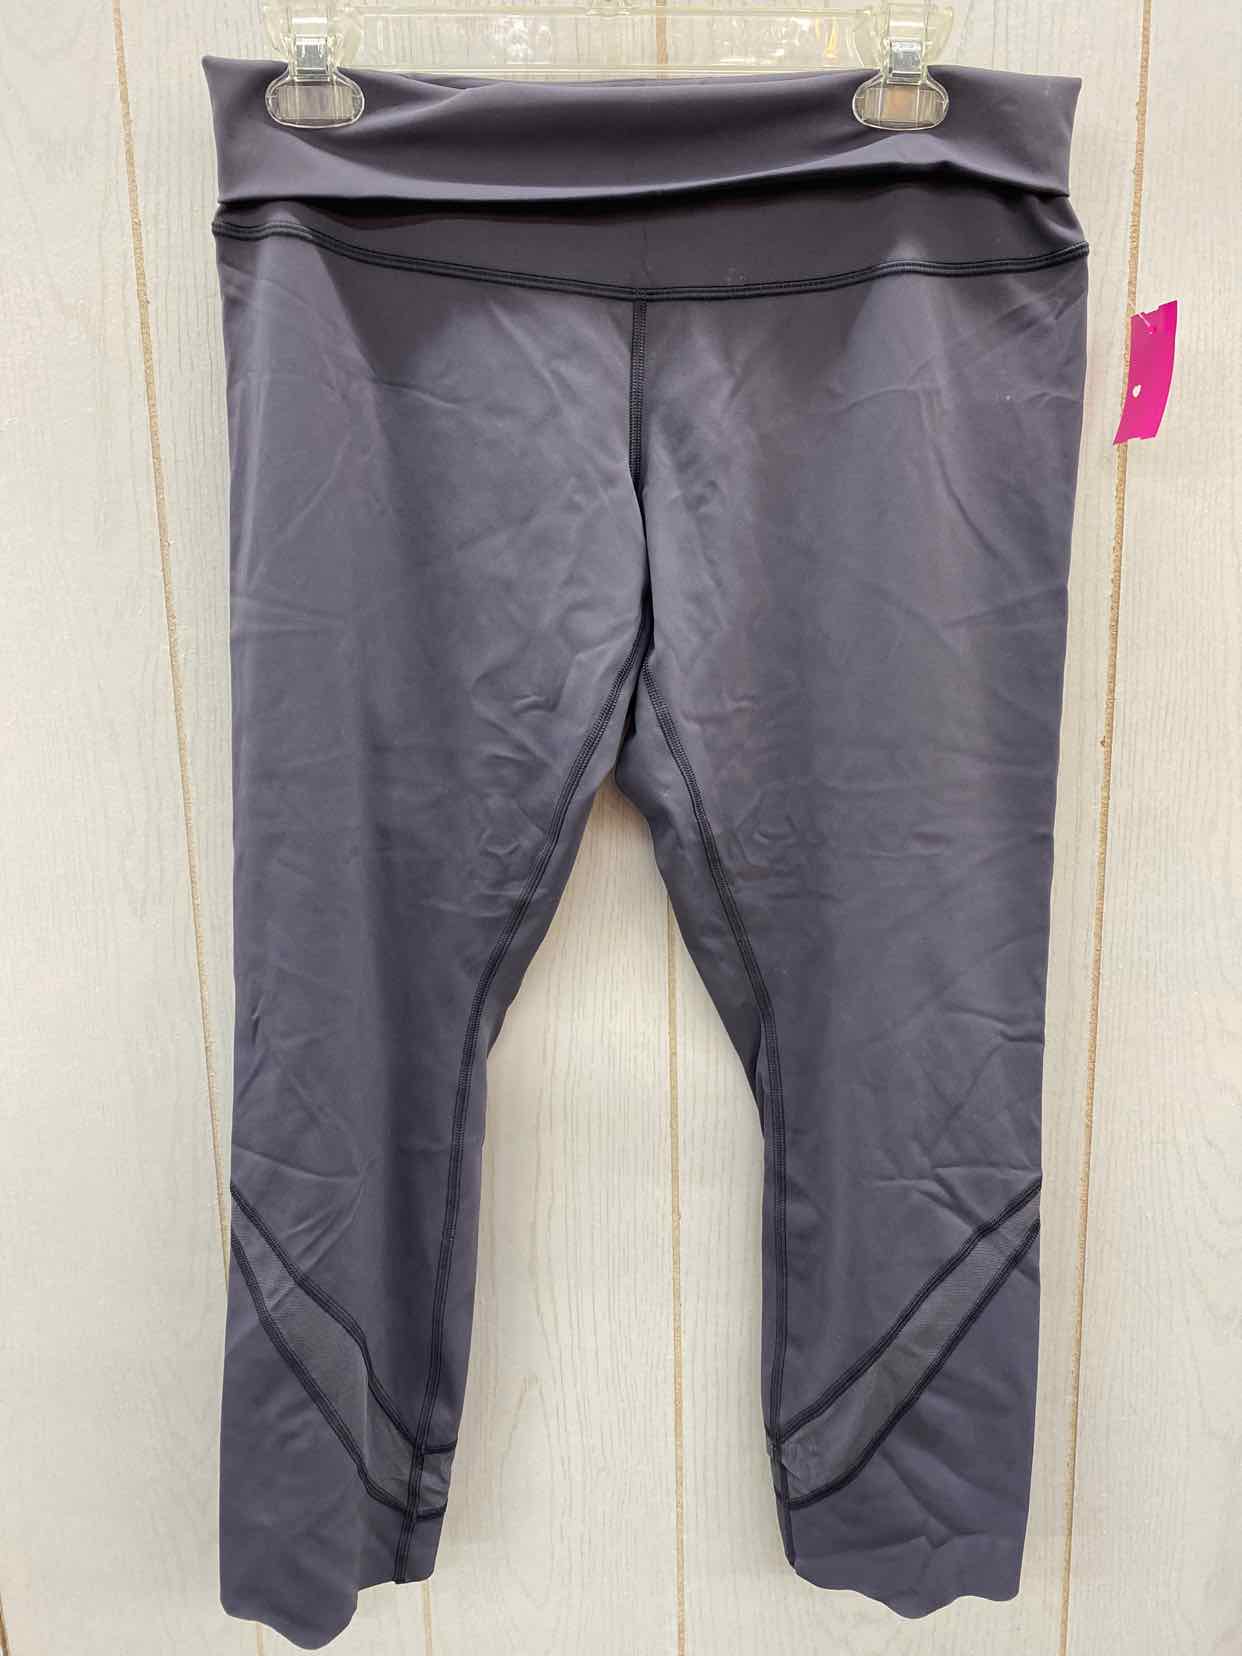 Lululemon Gray Womens Size 12 Leggings – Twice As Nice Consignments